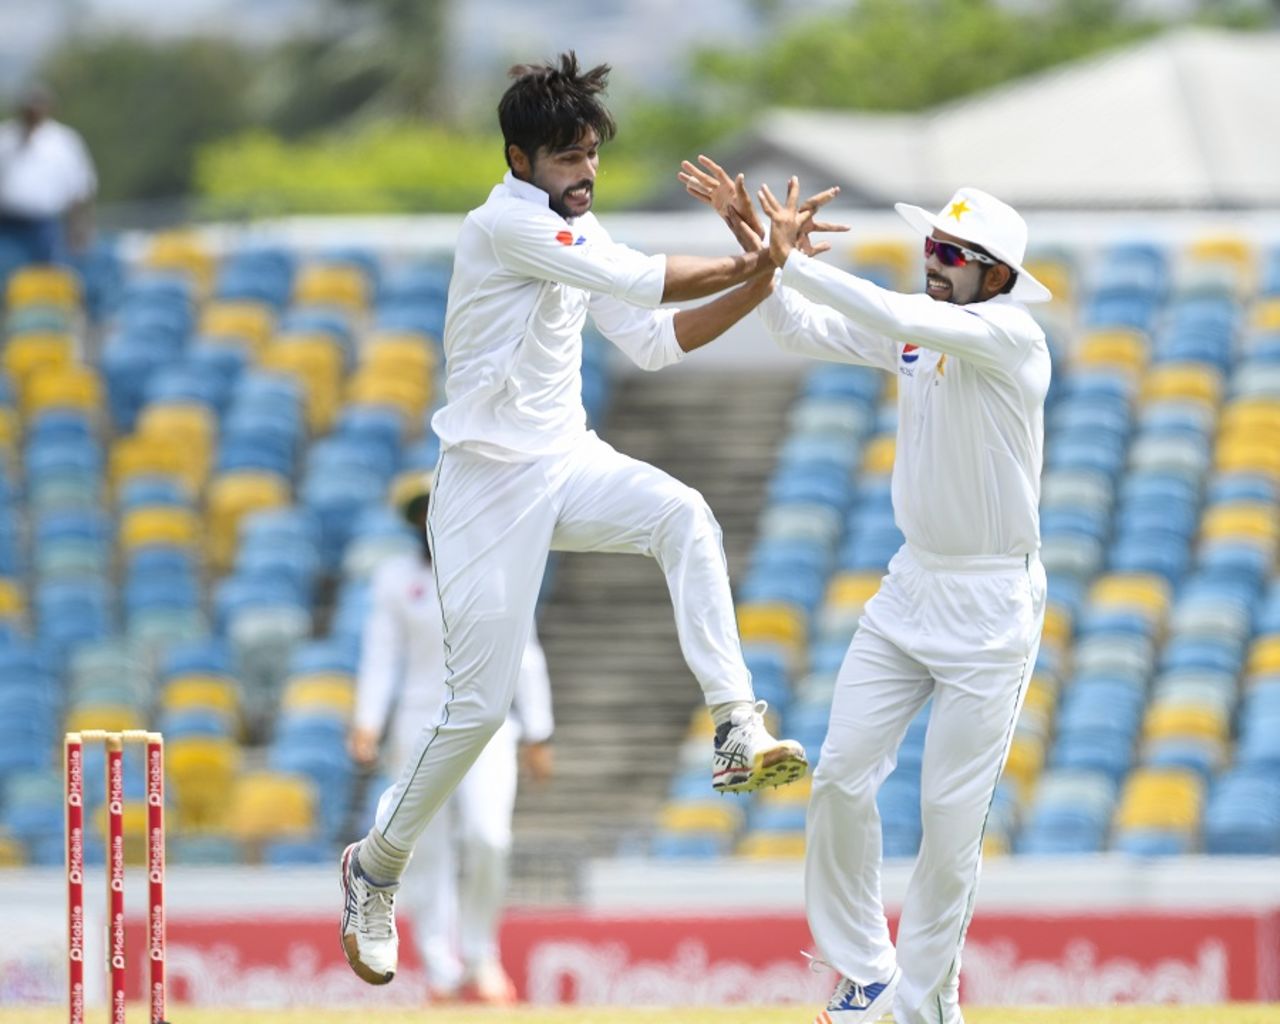 Mohammad Amir took a wicket in his first over on the second day, West Indies v Pakistan, 2nd Test, Bridgetown,2nd day, May 1, 2017